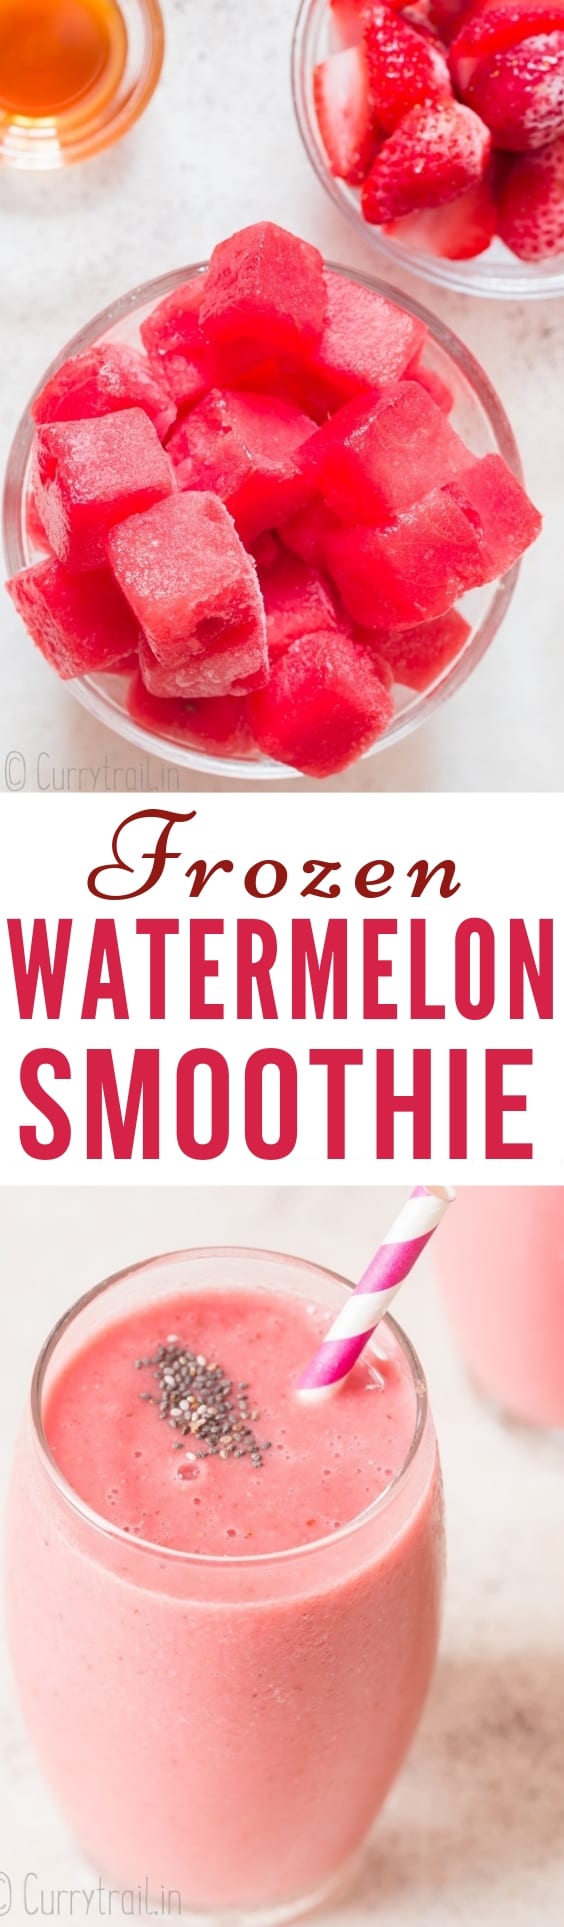 frozen watermelon smoothie recipe with text overlay